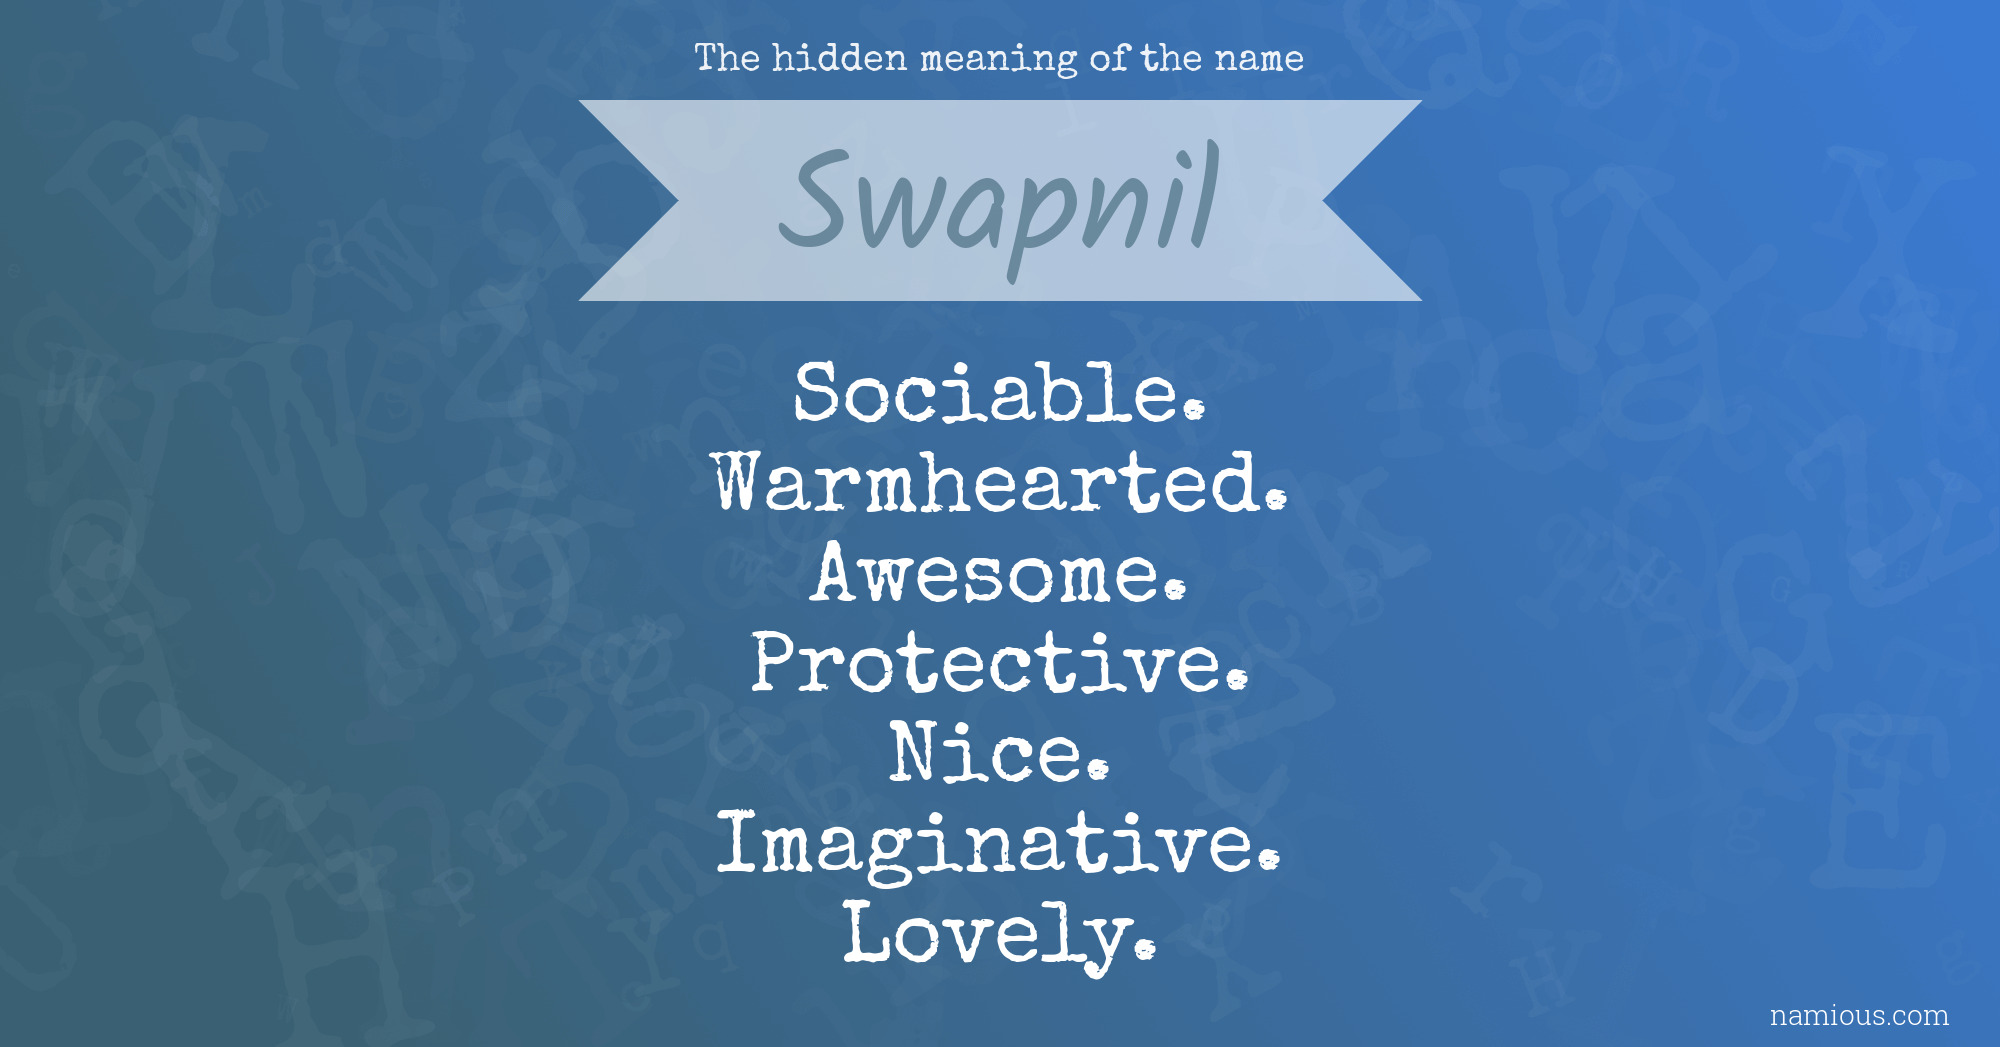 The hidden meaning of the name Swapnil